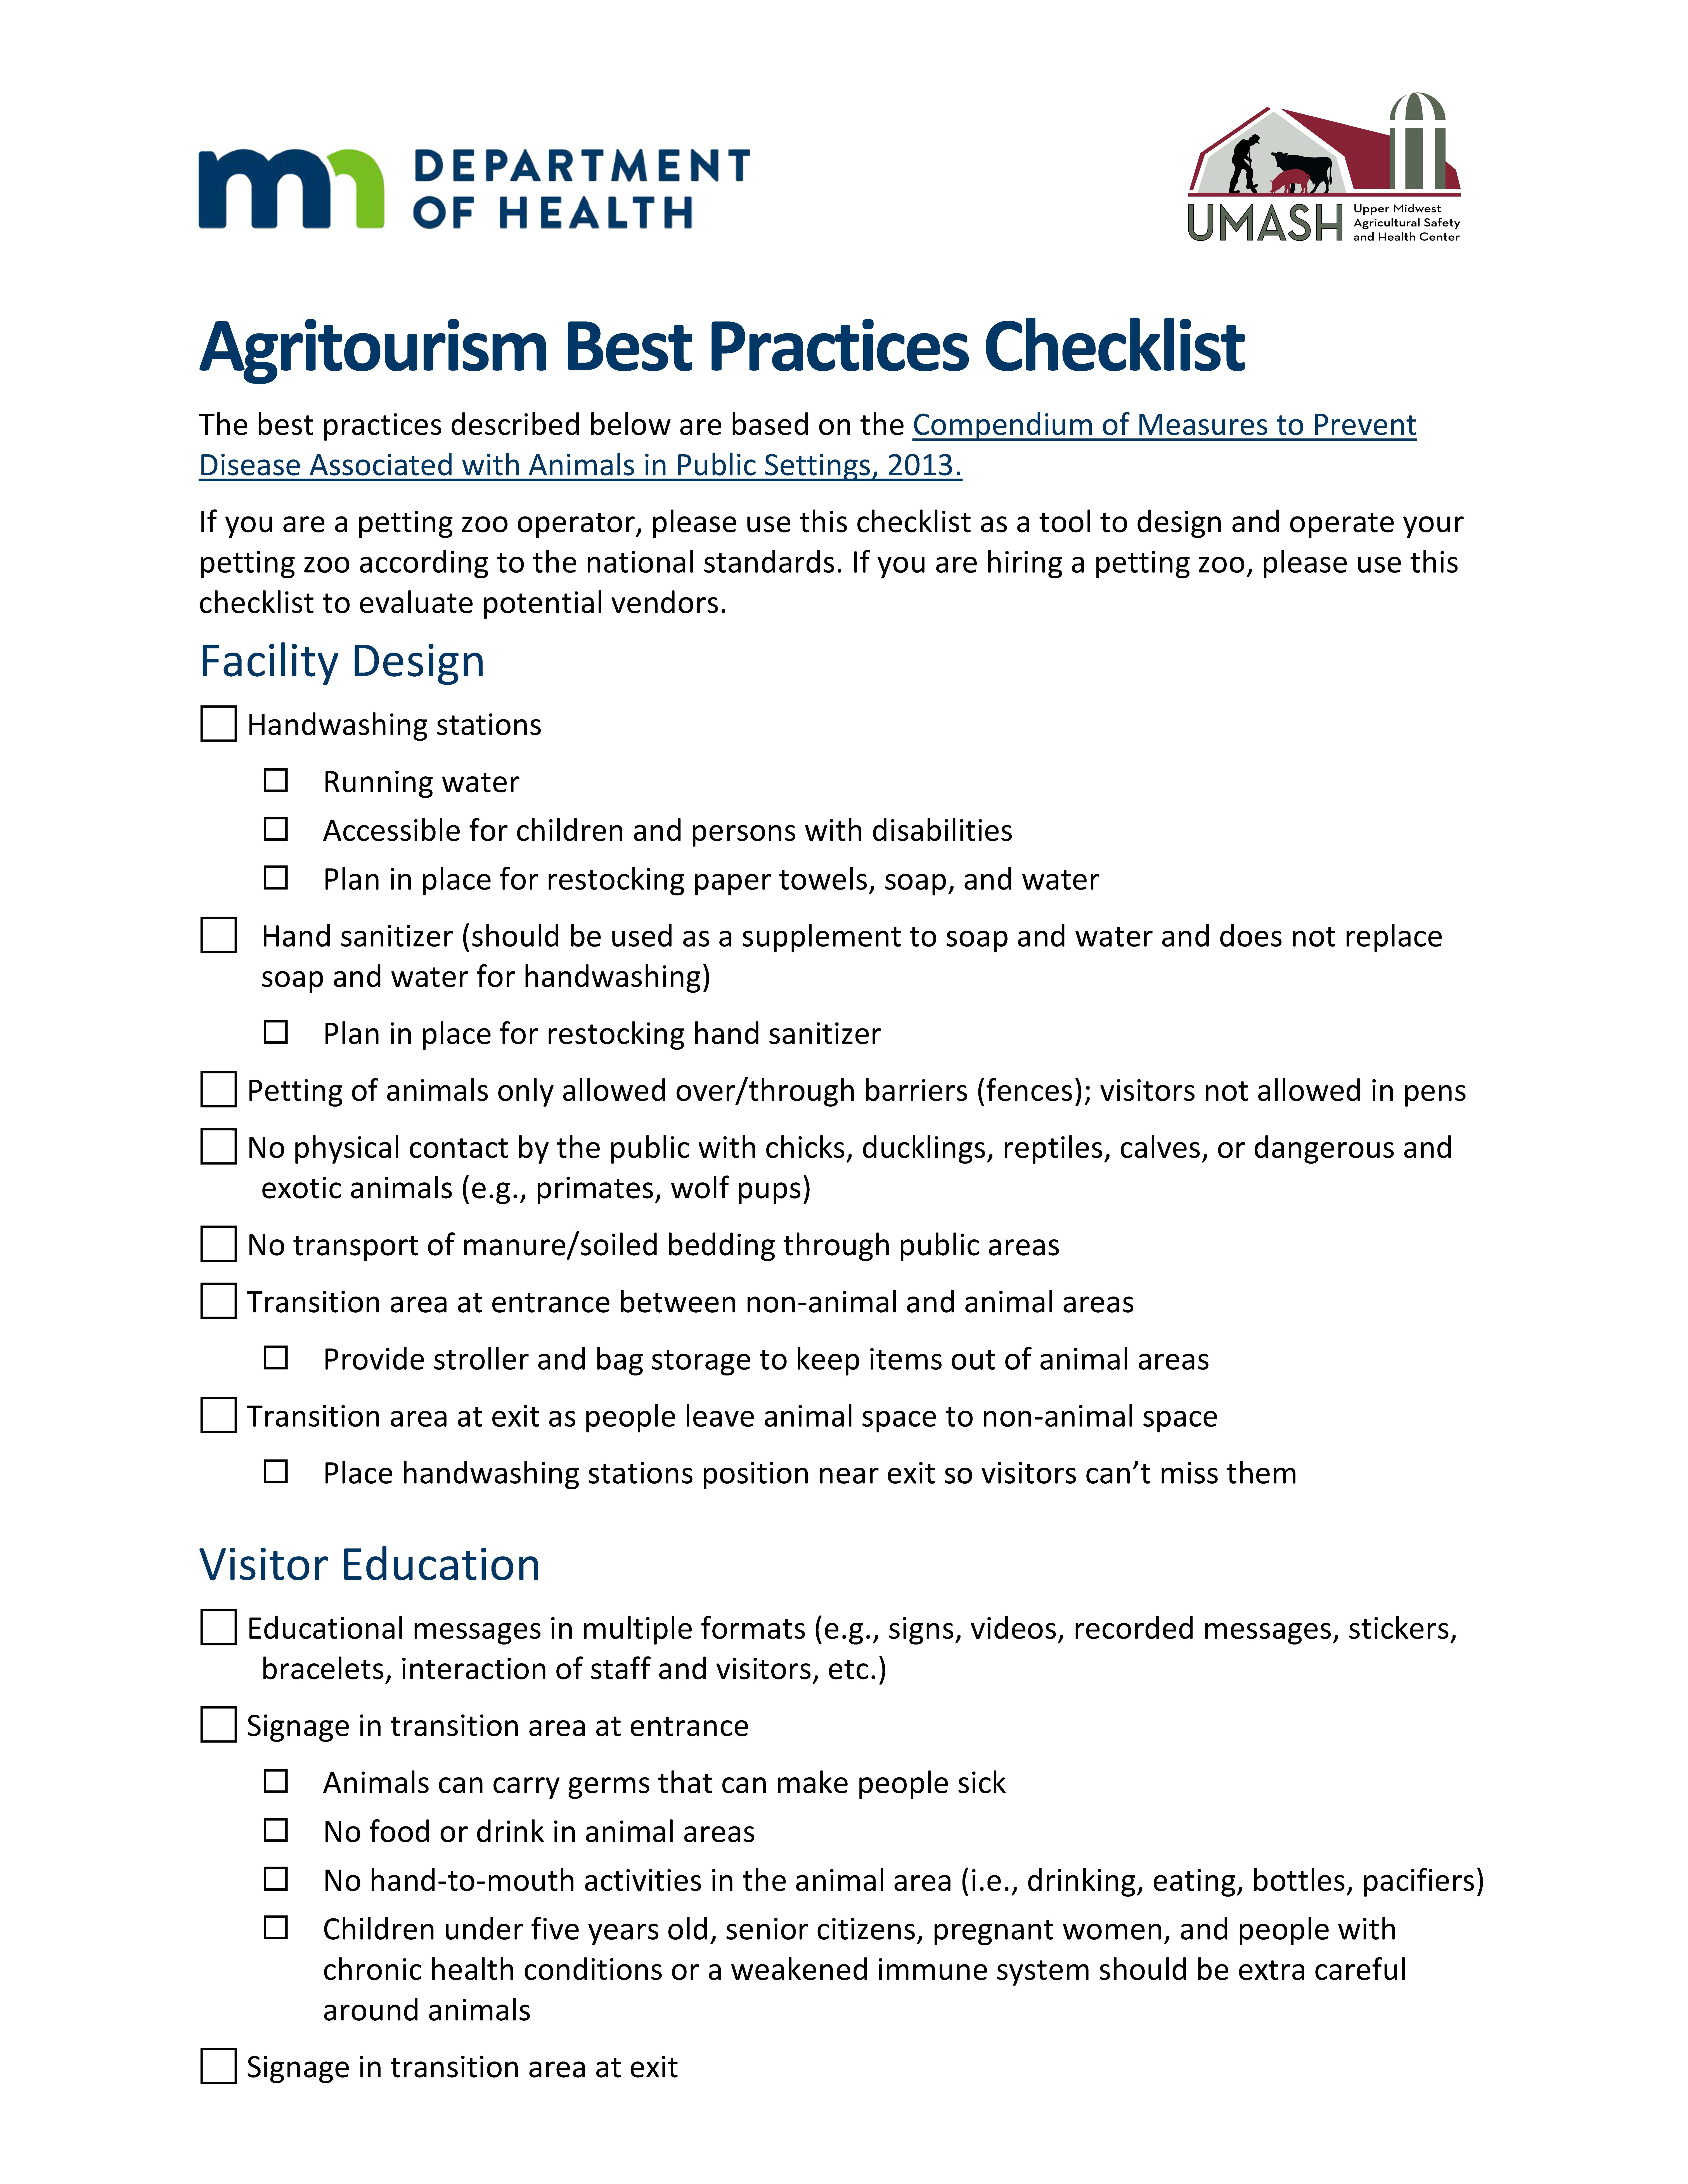 Petting Zoo Best Practices Checklist